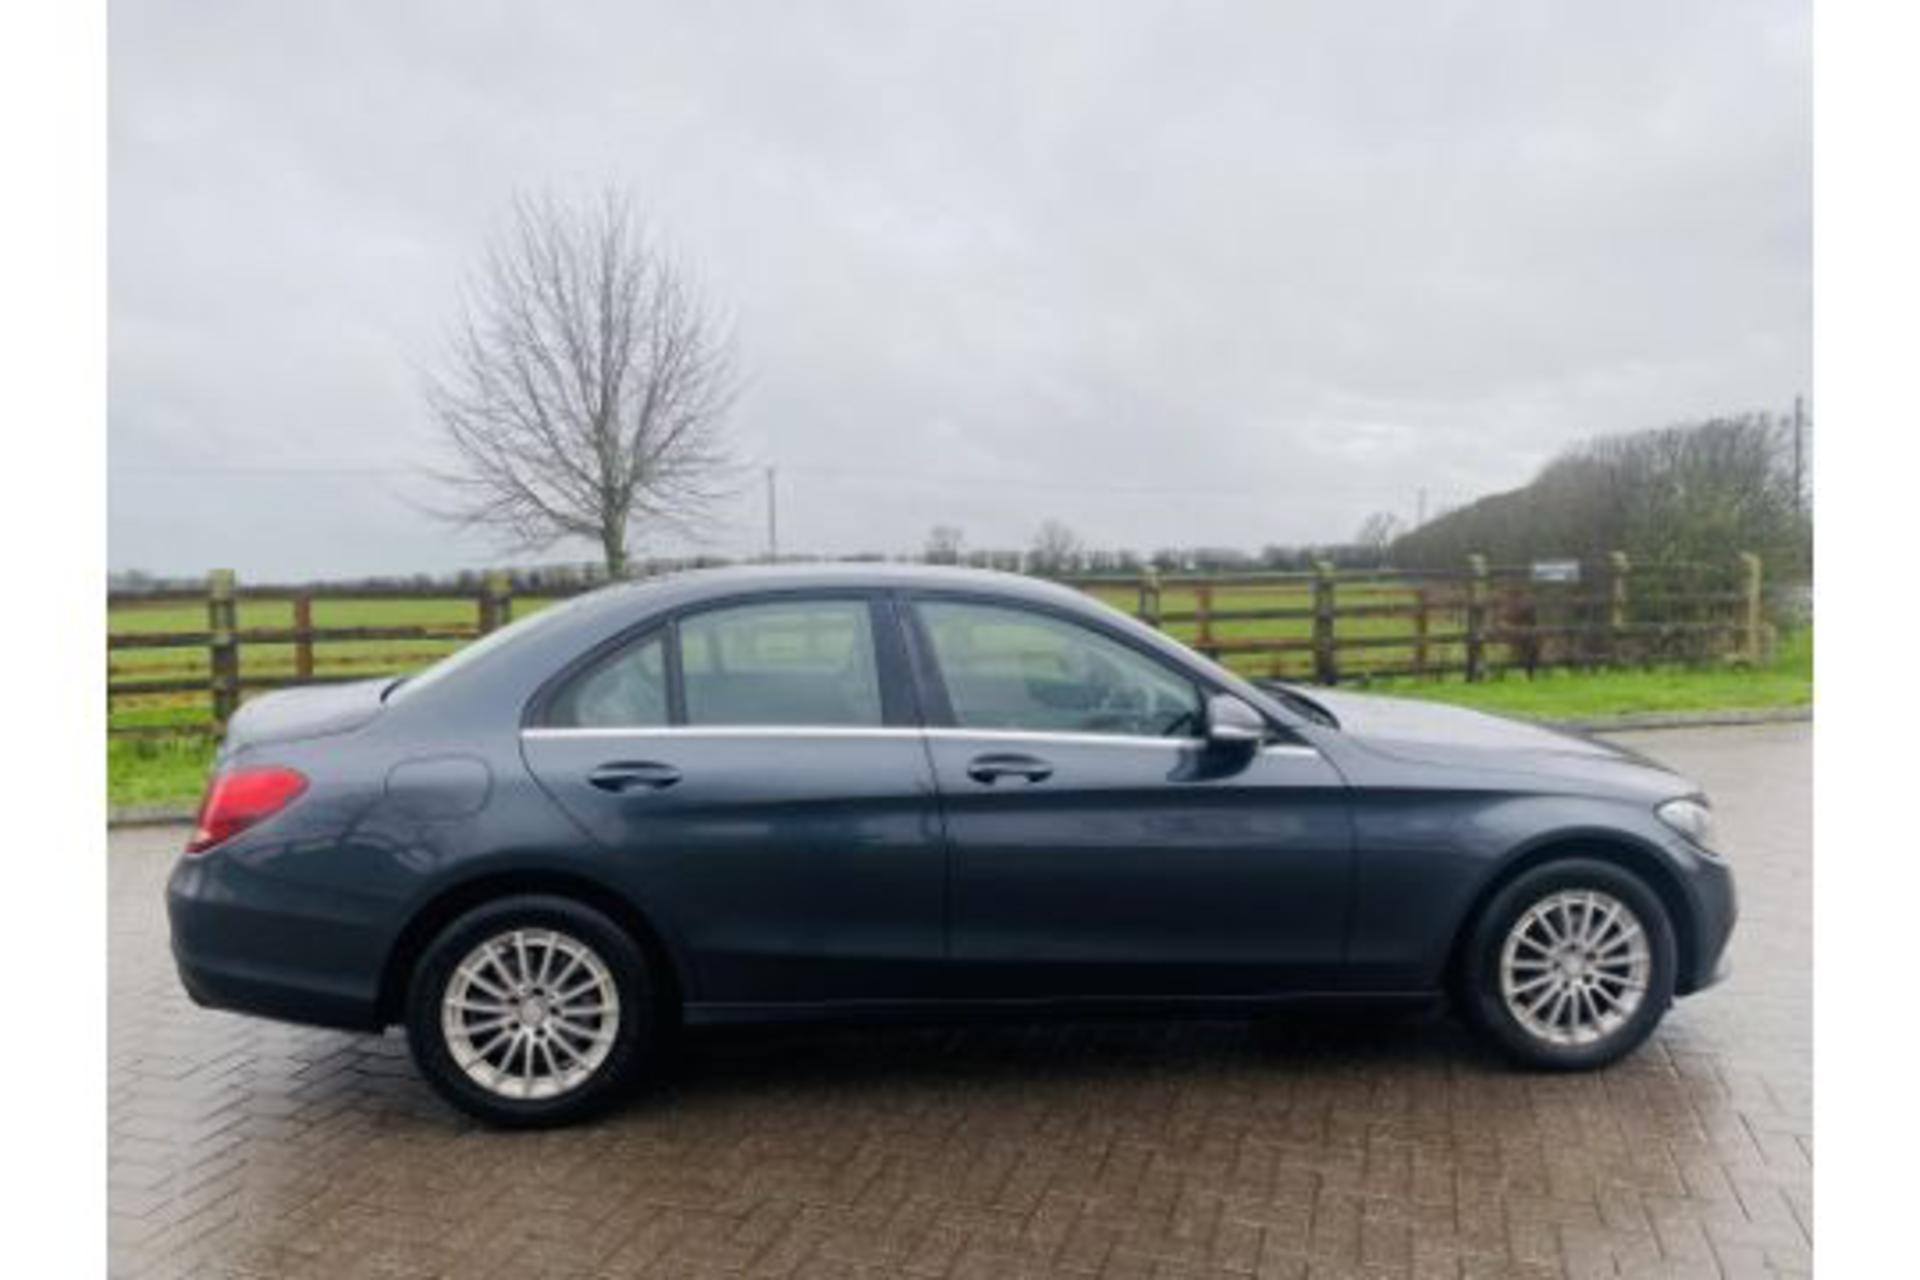 MERCEDES C220d "SPECIAL EQUIPMENT" SE SALOON - 2016 MODEL - LEATHER - NEW SHAPE - AIR CON - NO VAT!! - Image 4 of 26